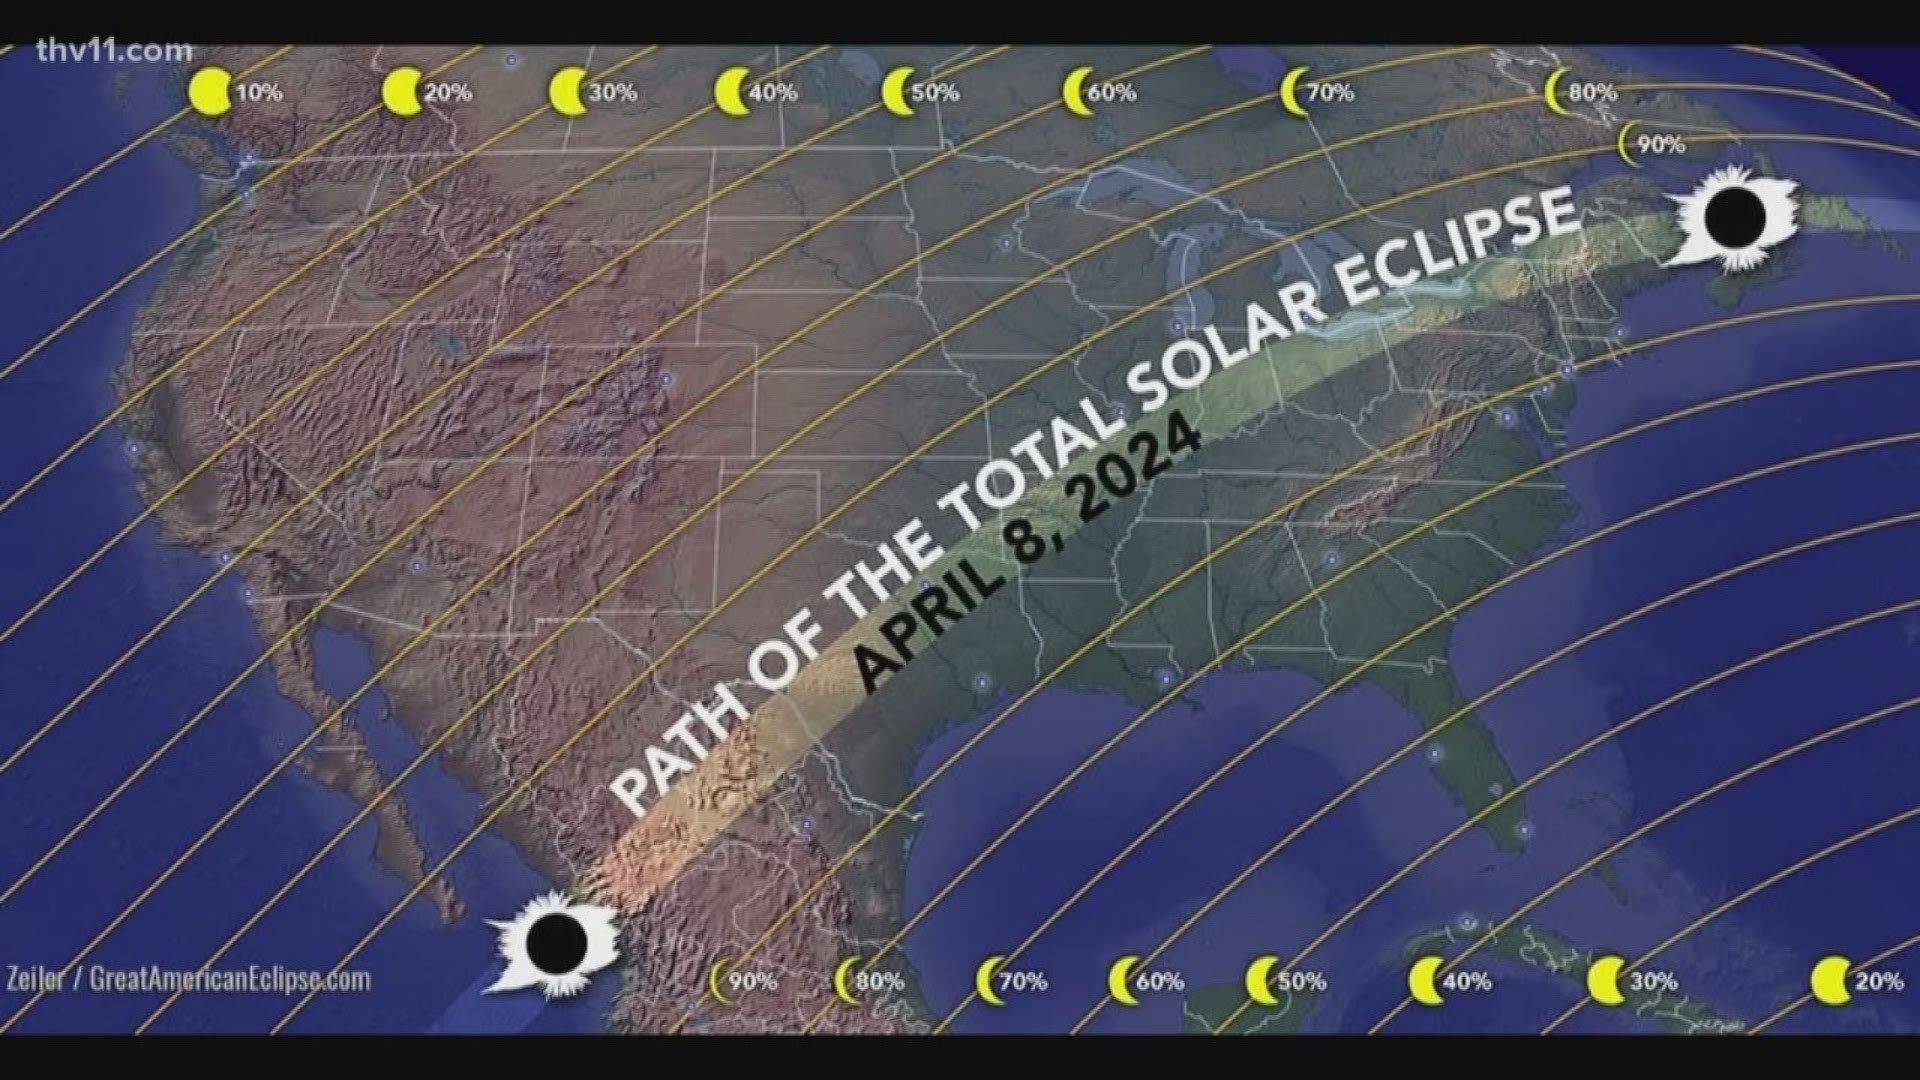 A total solar eclipse will cover Arkansas in exactly 5 years